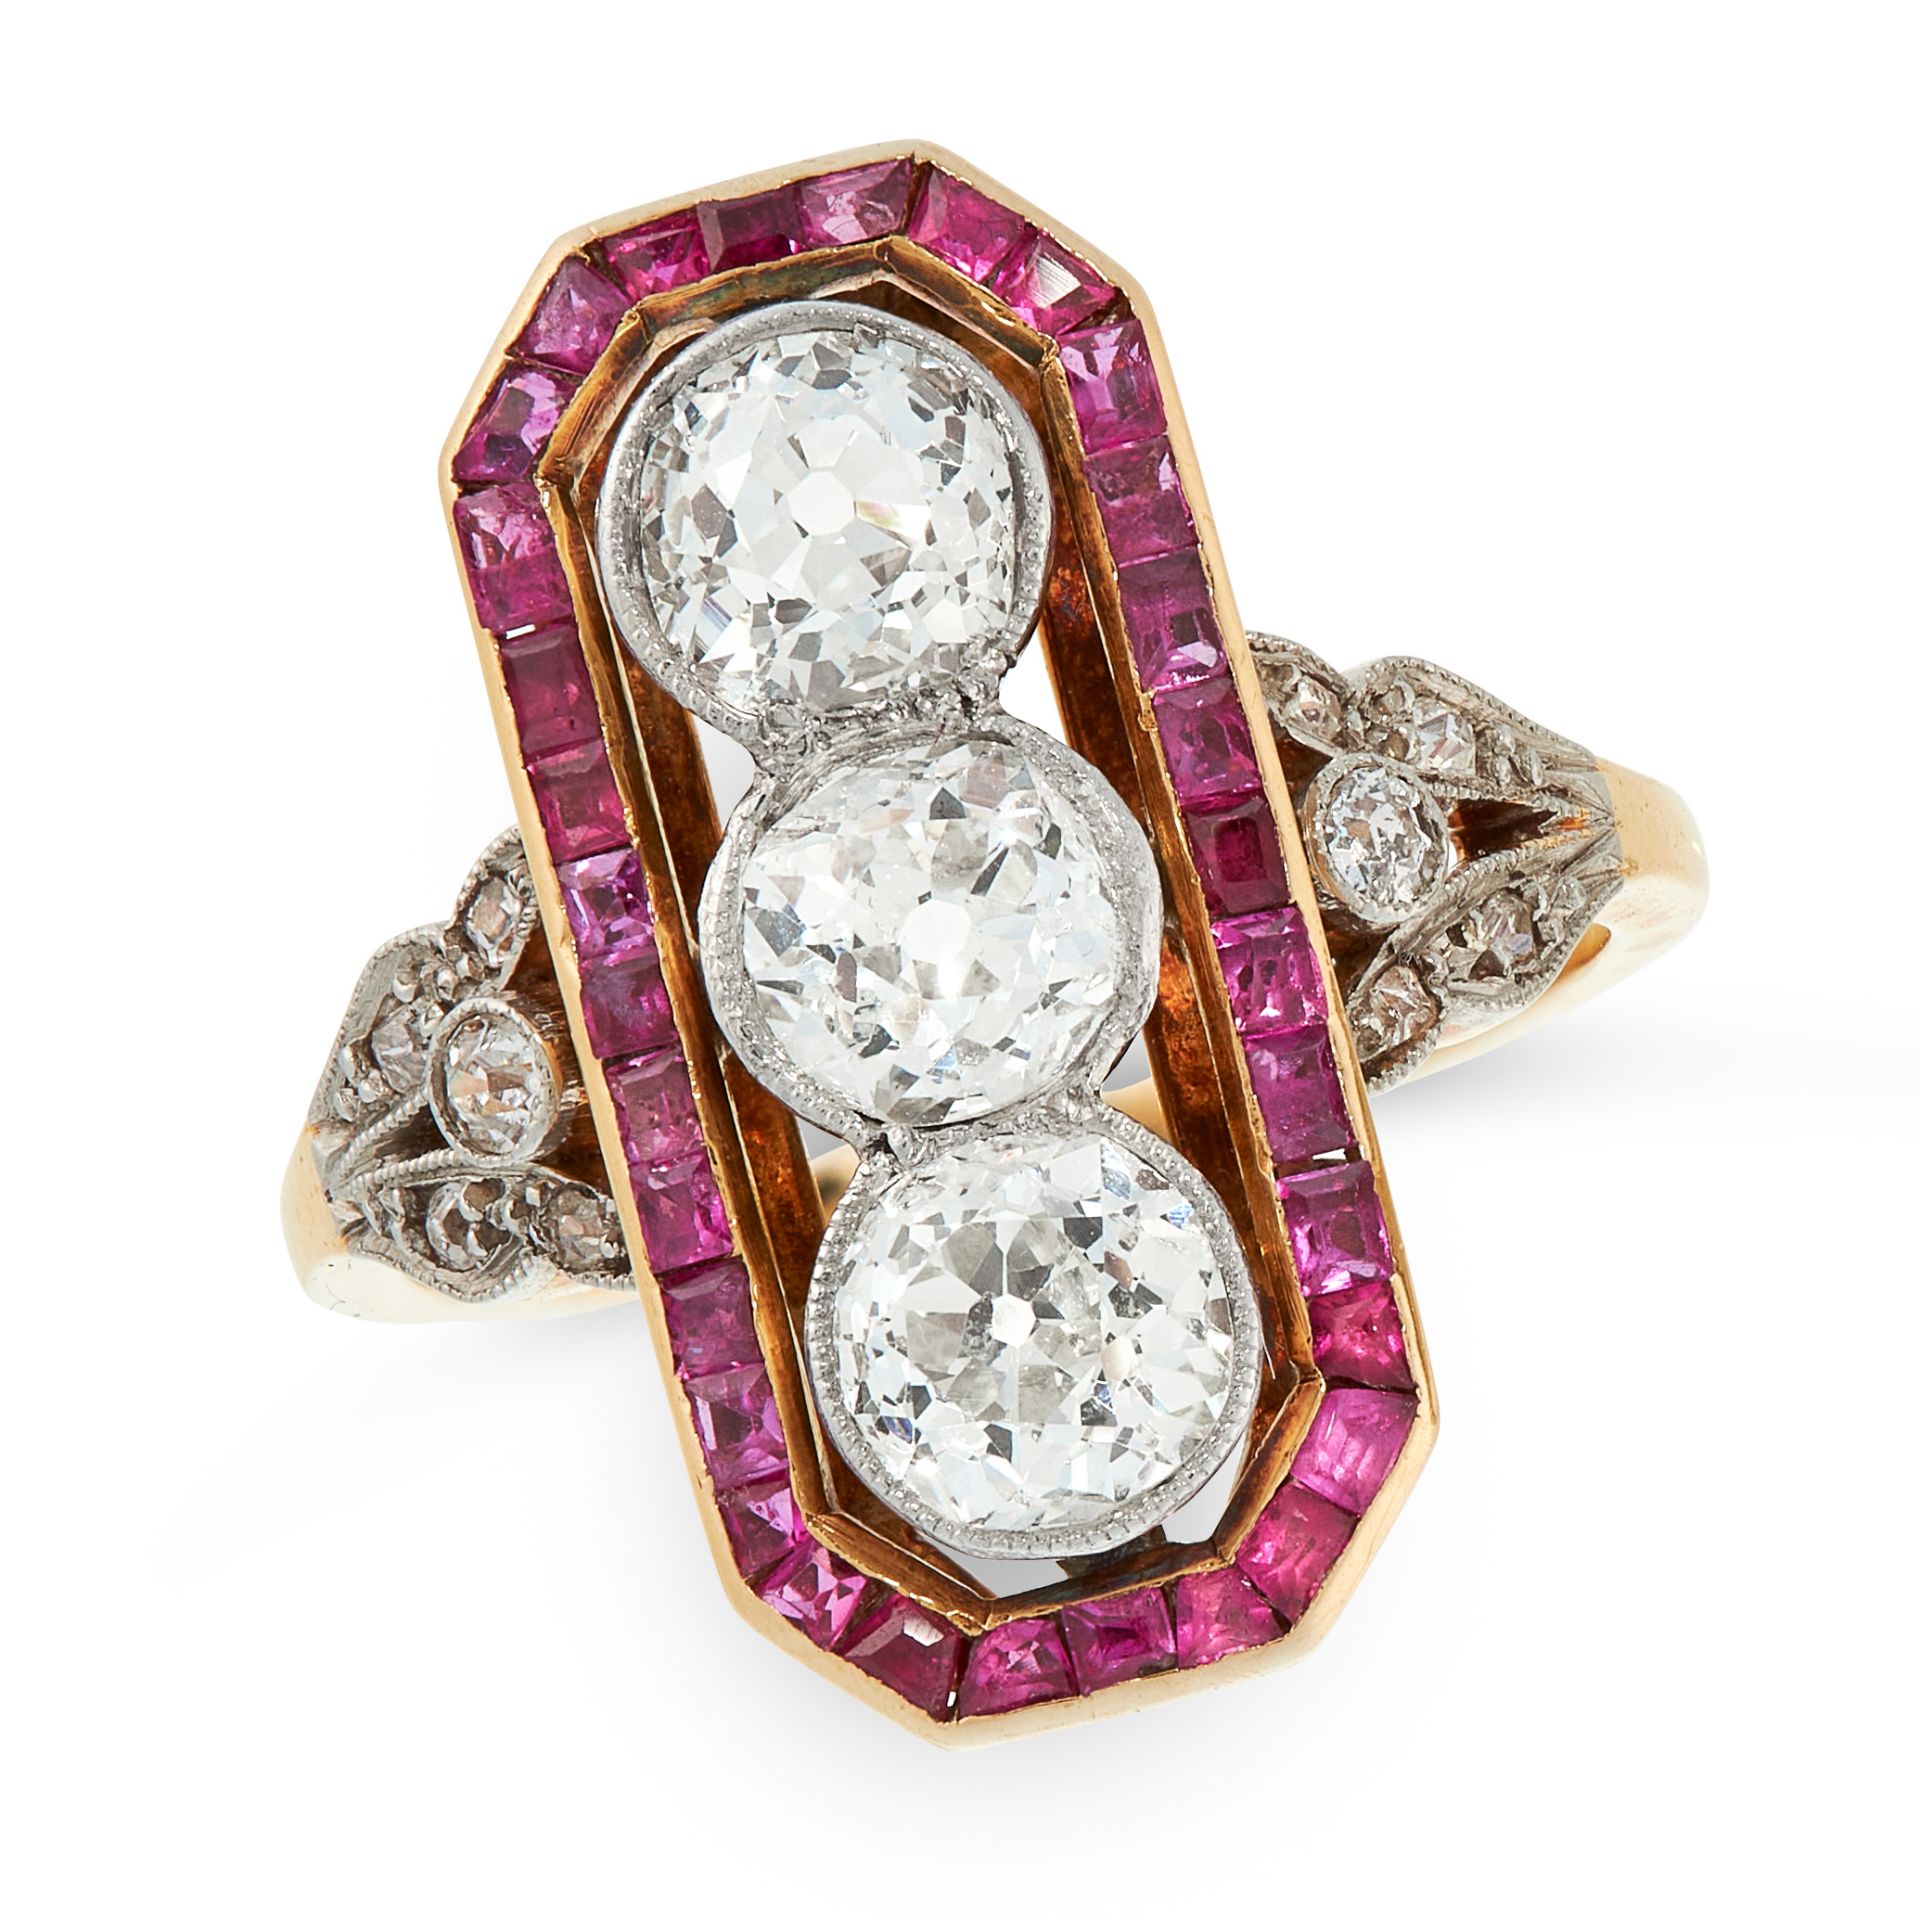 AN ART DECO DIAMOND AND RUBY DRESS RING in 18ct yellow gold, set with a trio of old cut diamonds